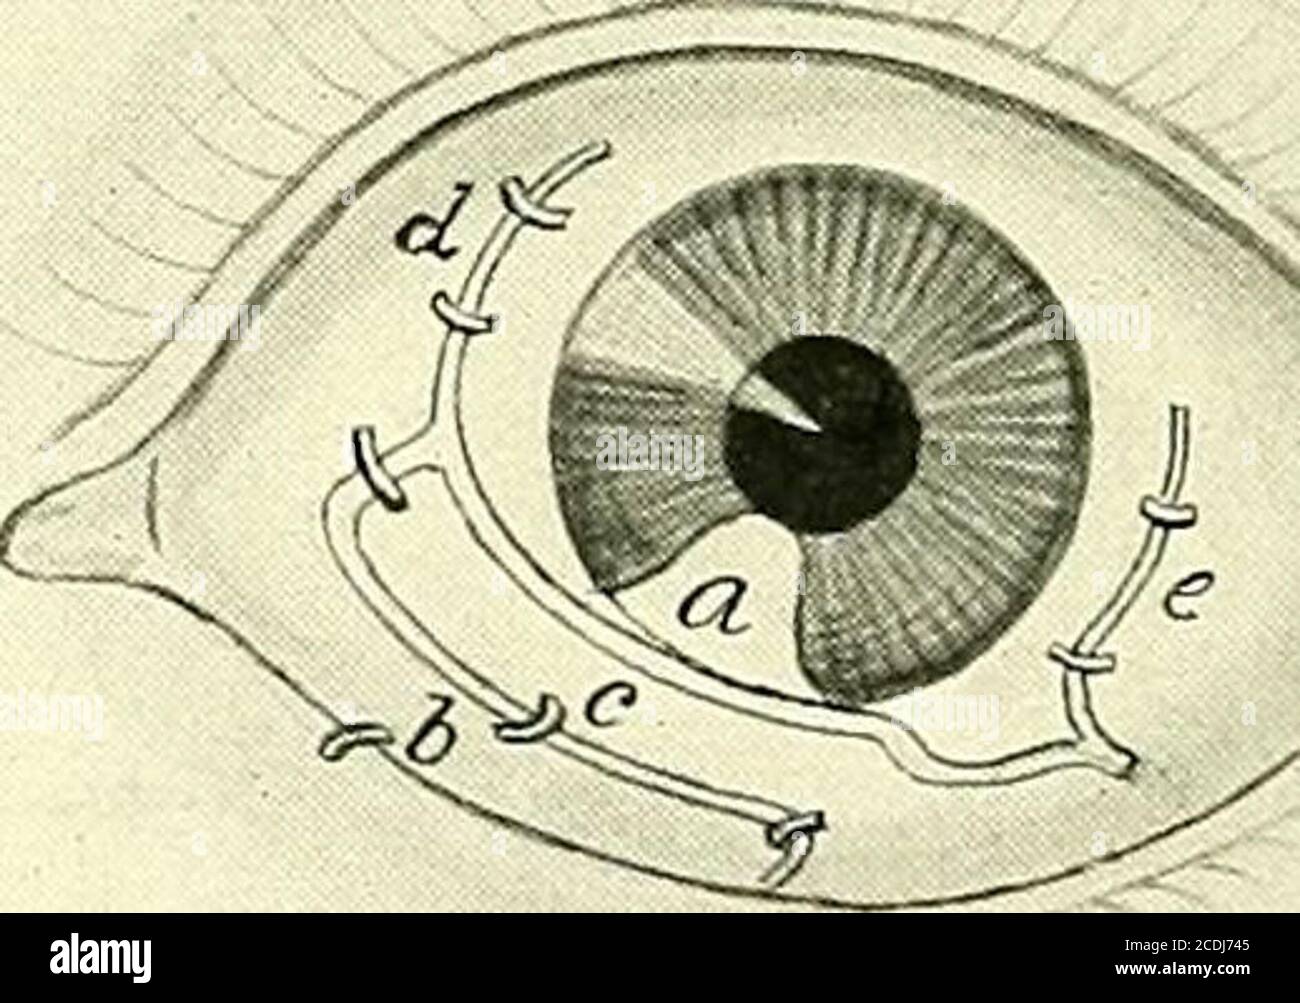 . Surgery, its principles and practice . Fig. 465.—Teales Operation for Symblepharon.The symblepharon is detached at a and removed. Two conjunctival flaps, b and c, are formed and turned to cover the denuded surface of the eyeball and of the inner side of the lid.junctival gaps are closed by sutures, d and e. The con- are as valuable as the systematic breaking up of adhesions several times aday with a probe, associated with rigorous local antisepsis. Operations for Symblepharon.—If in spite of these precautions asymblepharon forms, after all inflammatory symptoms have subsided^an attempt must Stock Photo